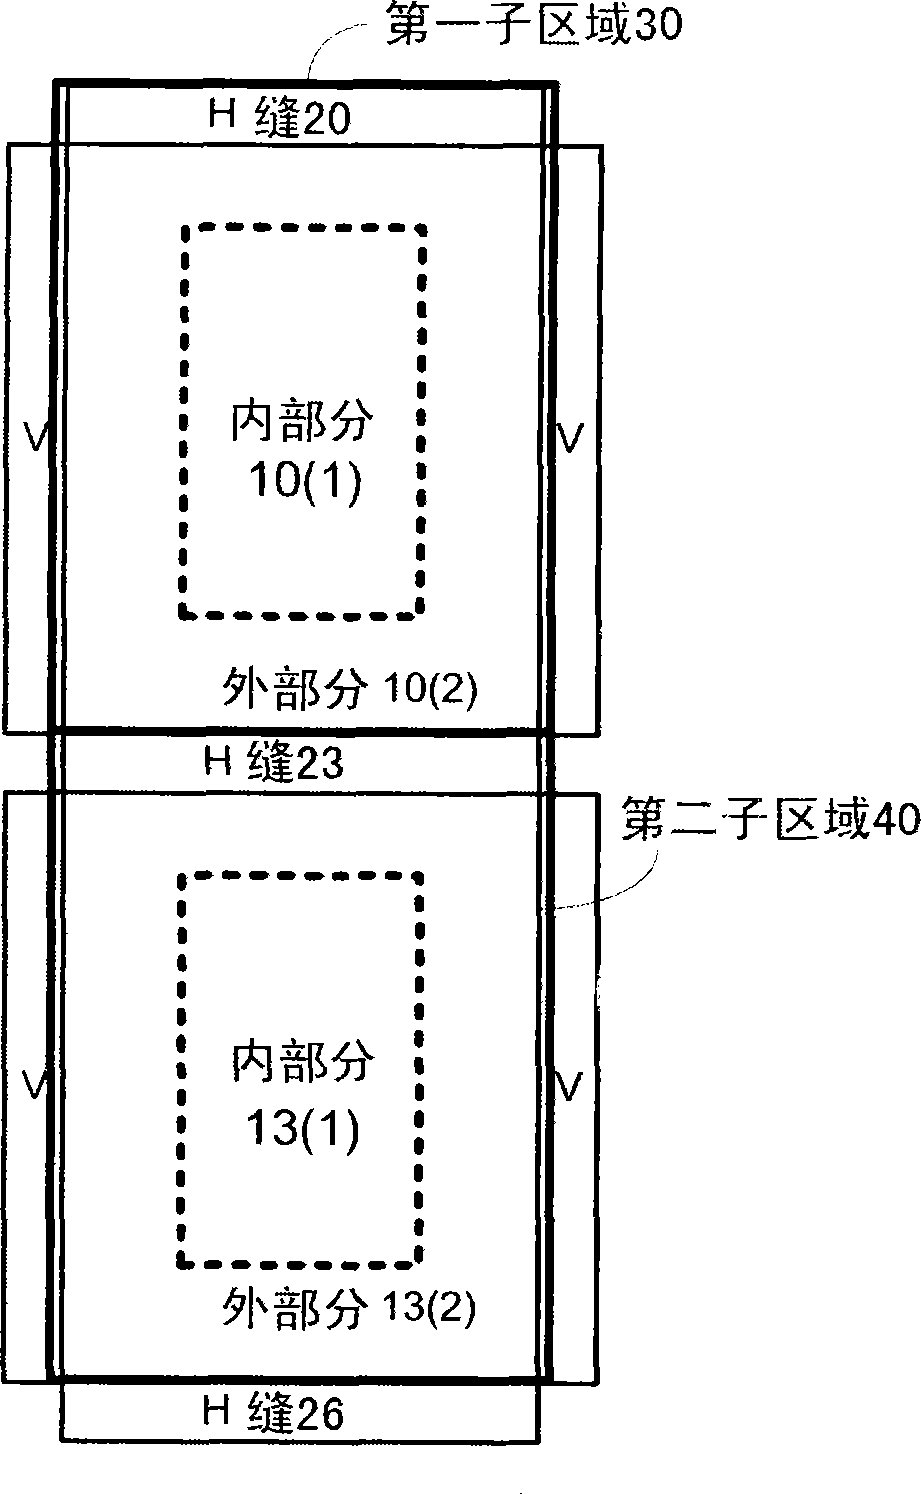 Method and system for evaluating object